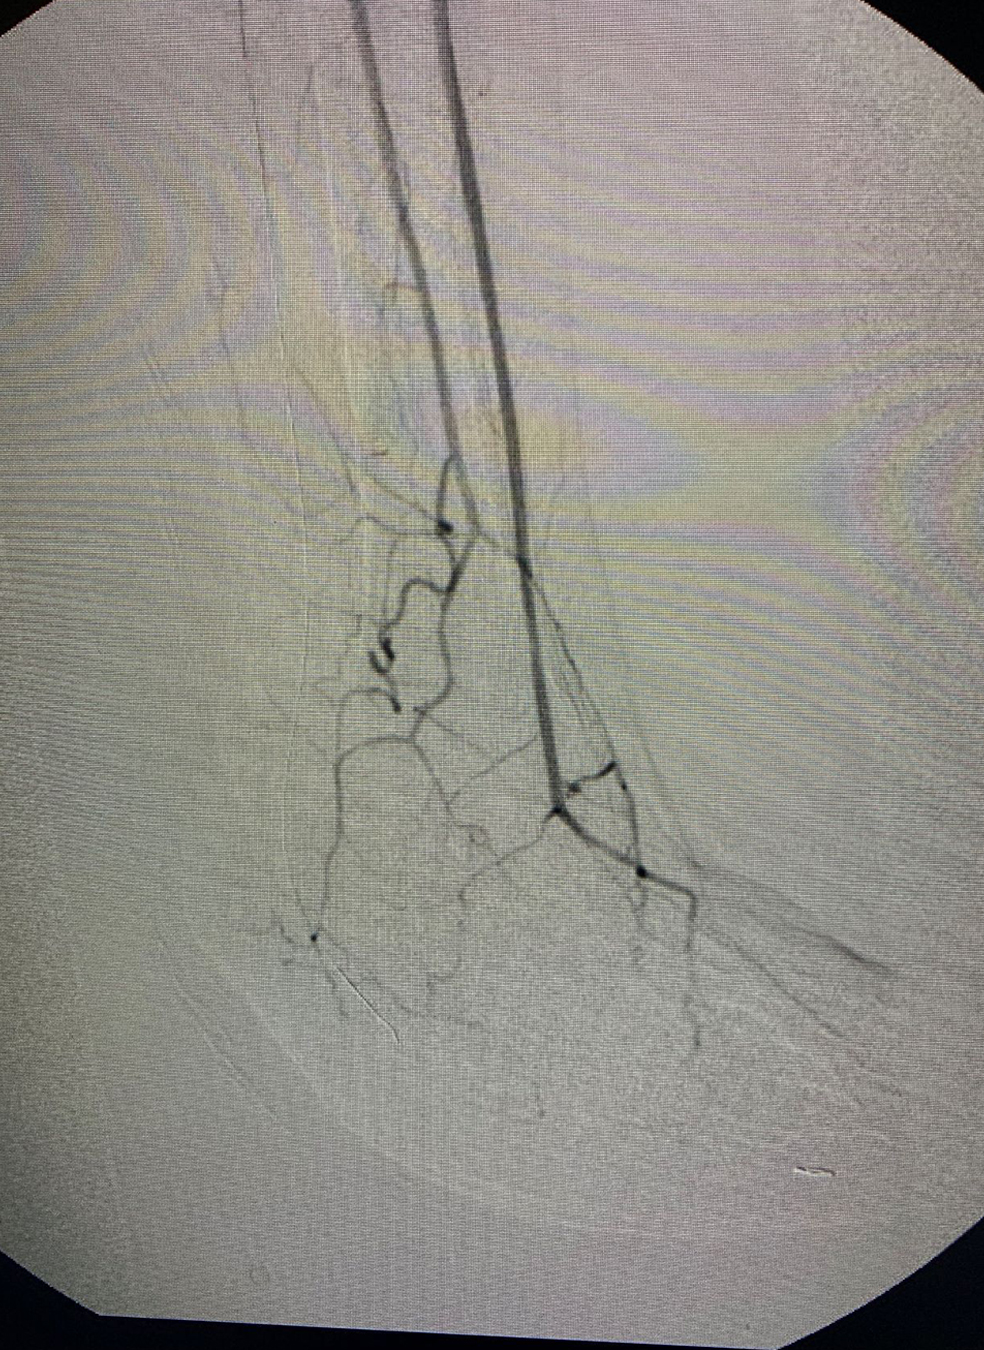 While angiography showed a normal anterior tibial (AT) artery, it also revealed occlusion of the distal posterior tibial artery.